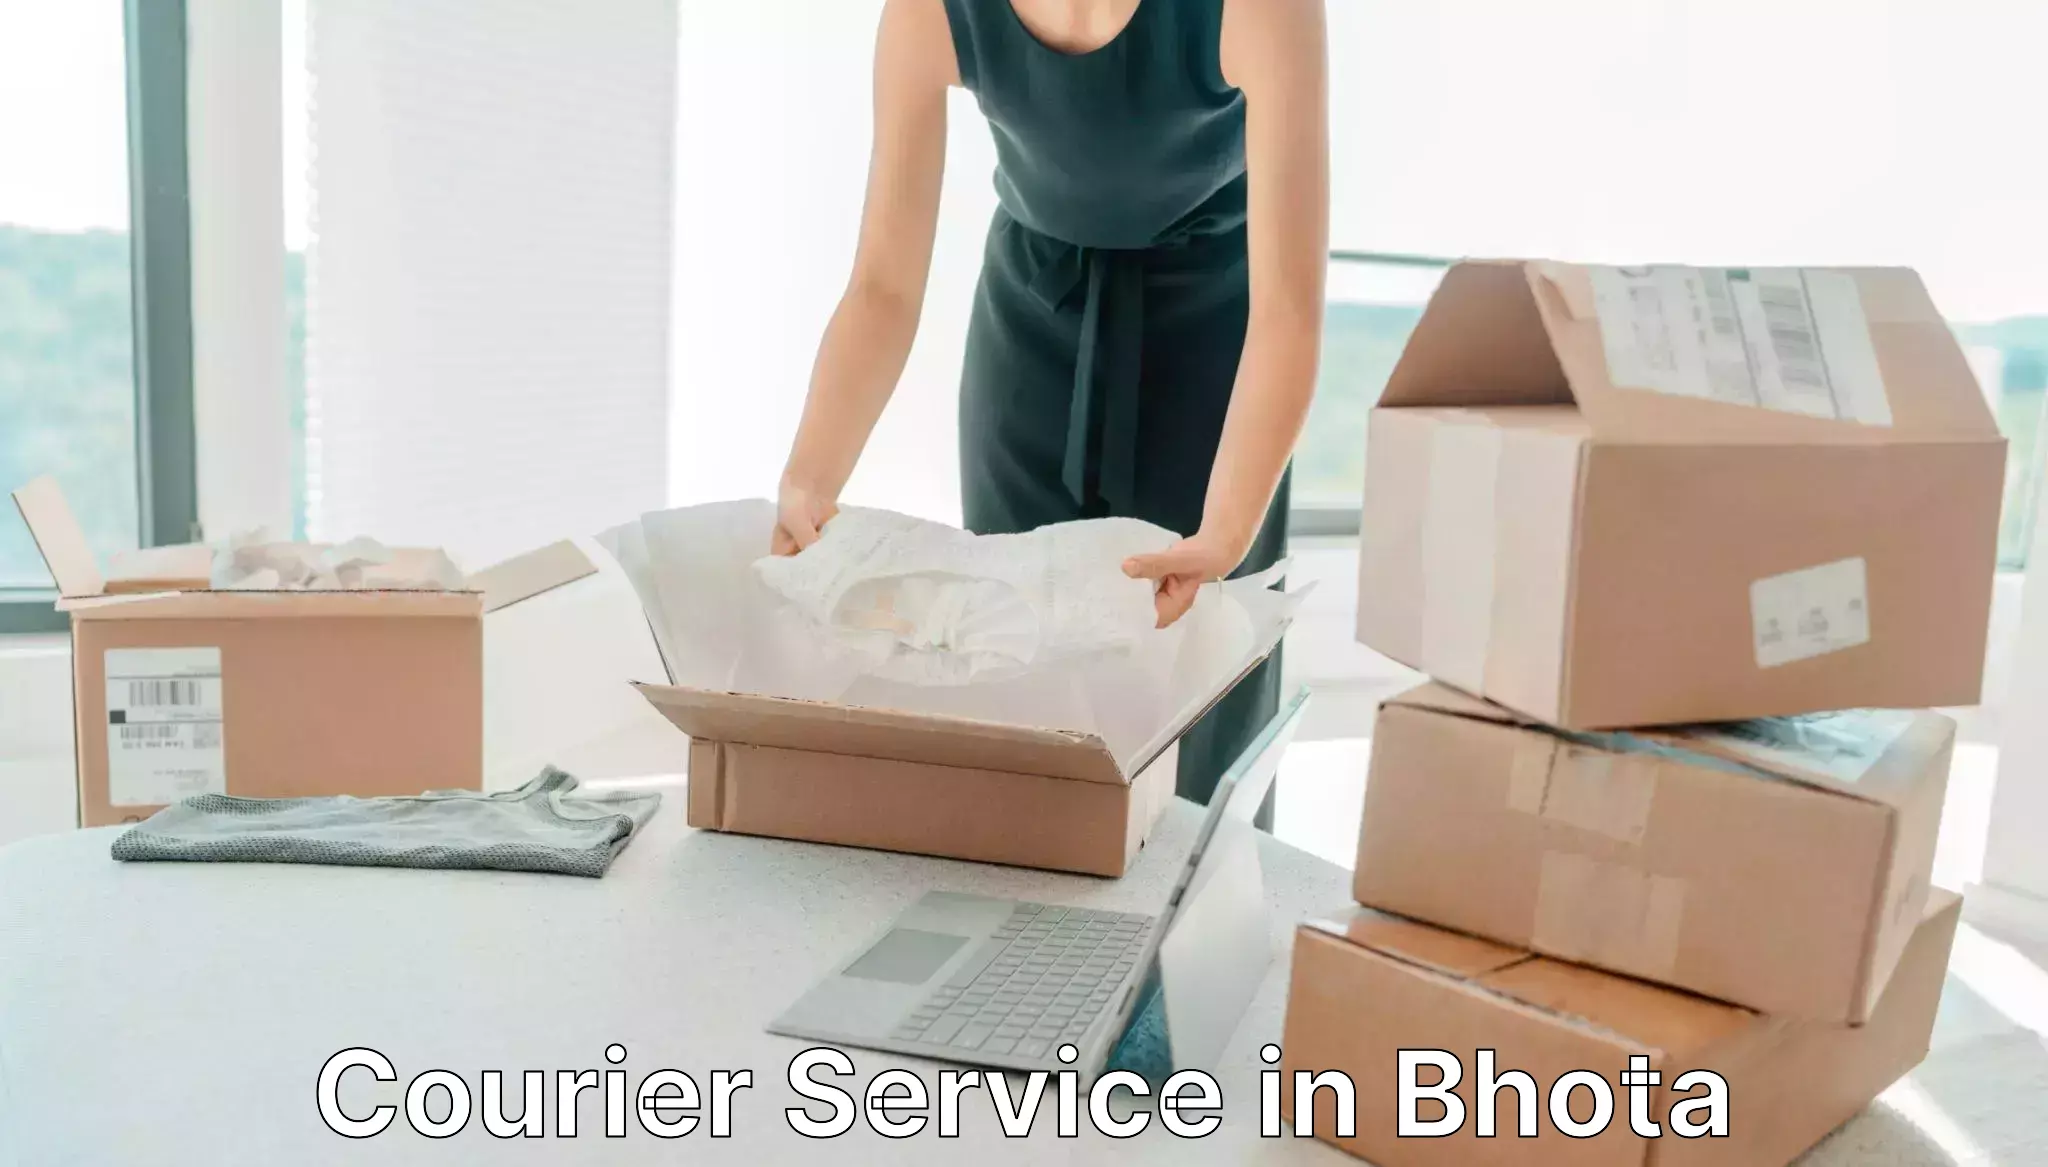 Flexible parcel services in Bhota